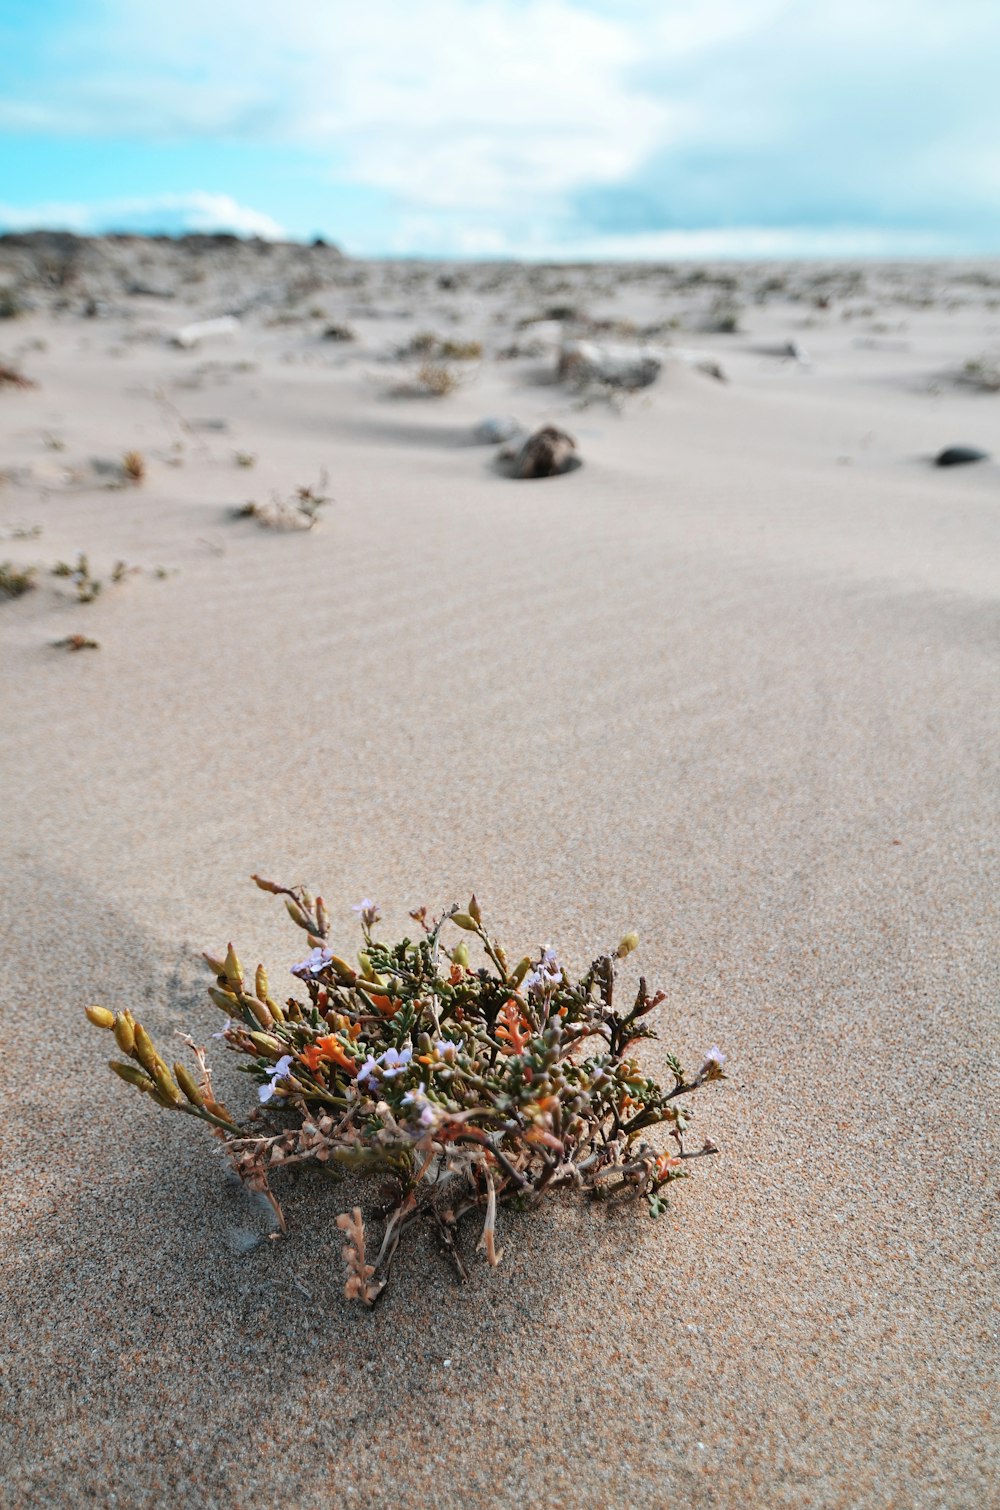 a small plant growing in the sand